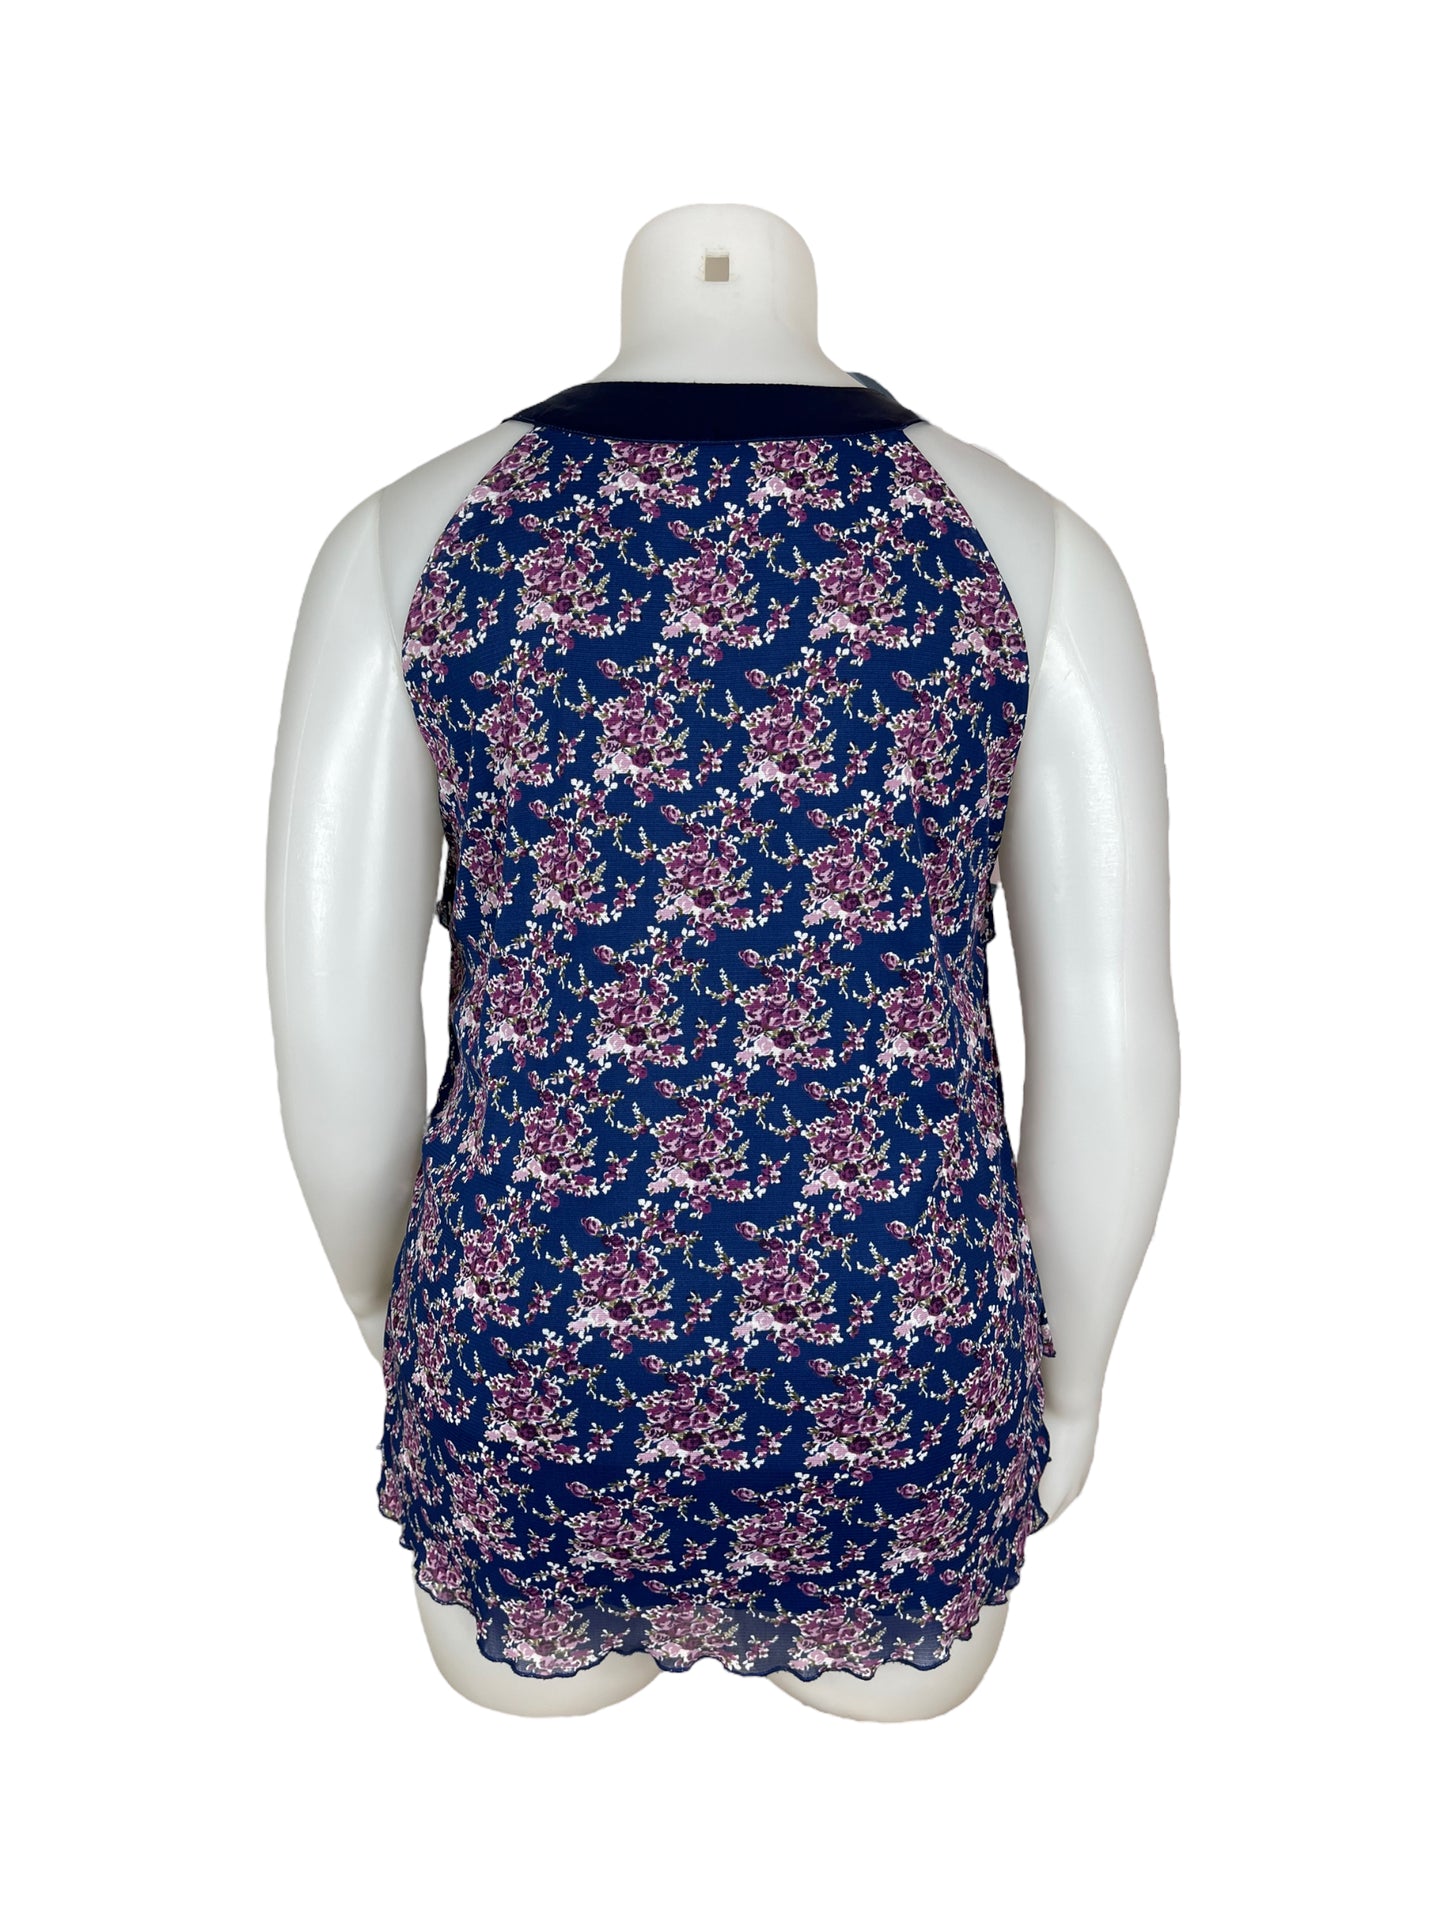 "Pennington's" Blue Sleeveless Frilly Shirt with Purple Floral (X)